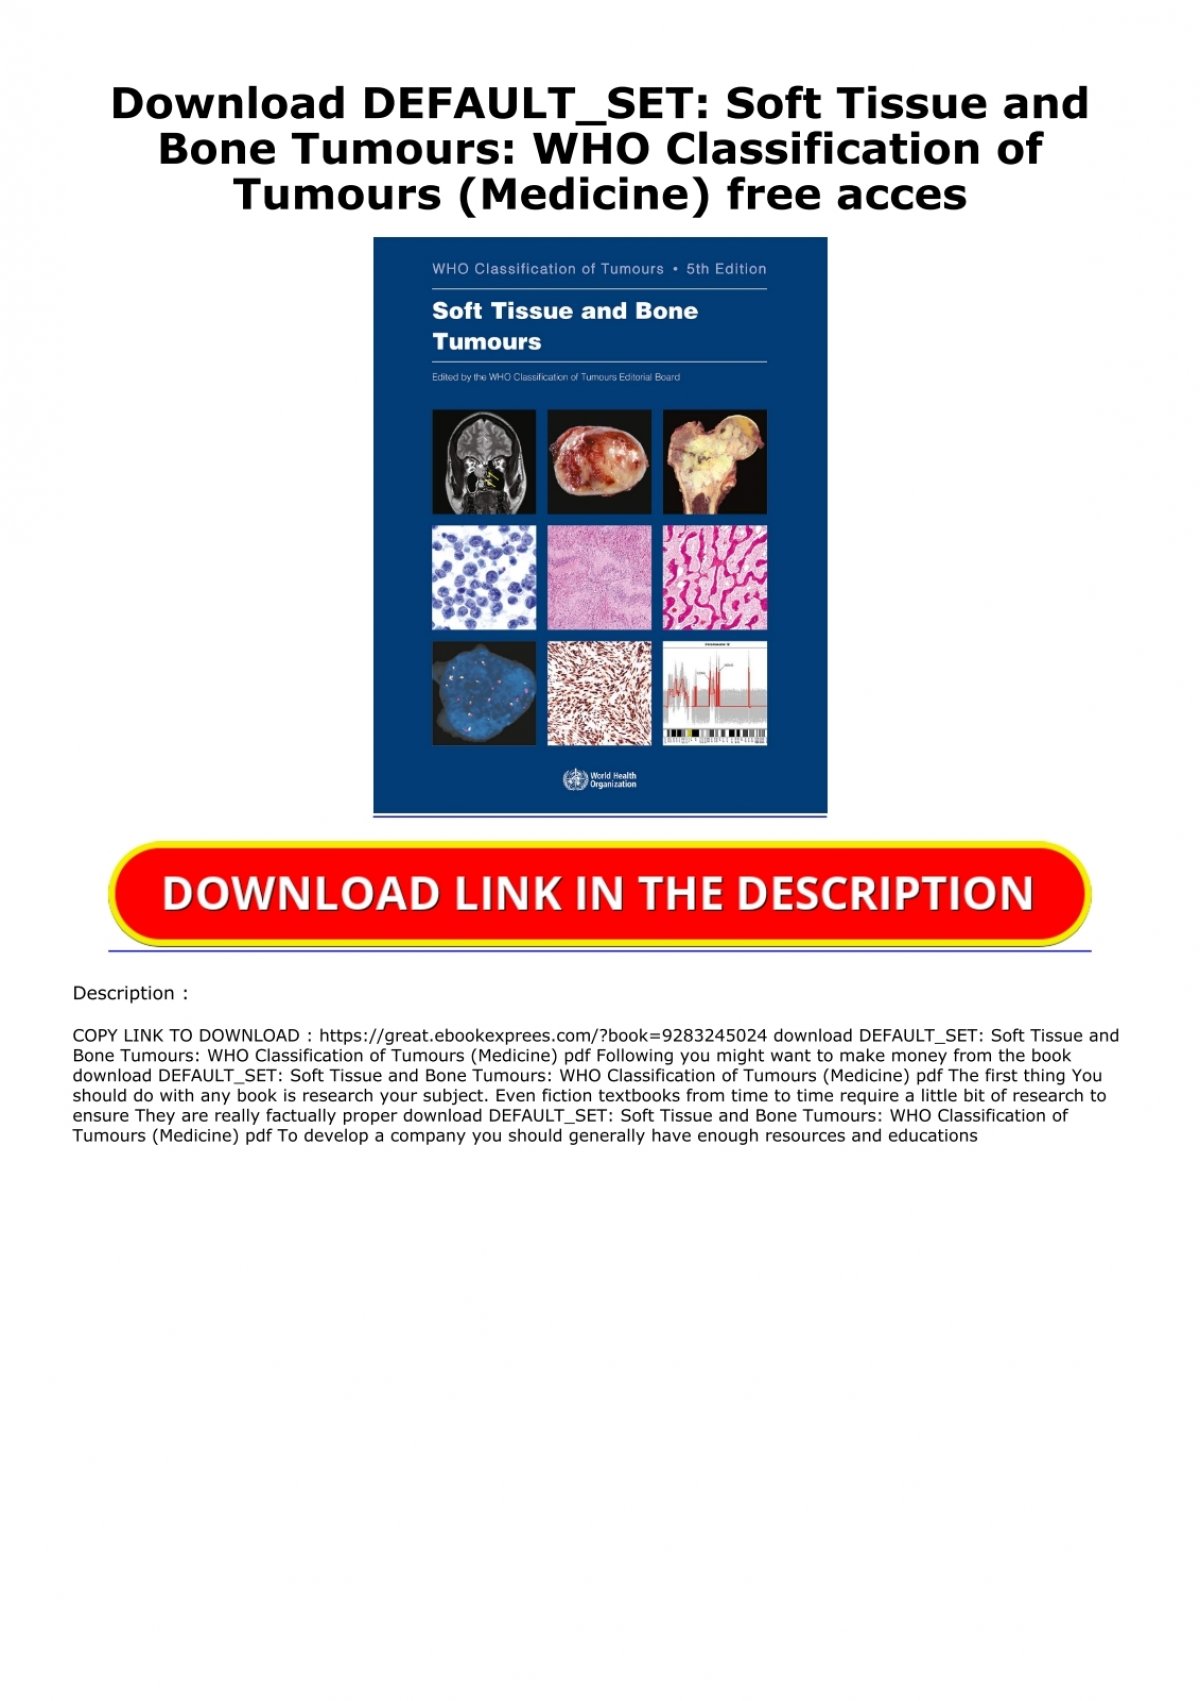 Download Defaultset Soft Tissue And Bone Tumours Who Classification